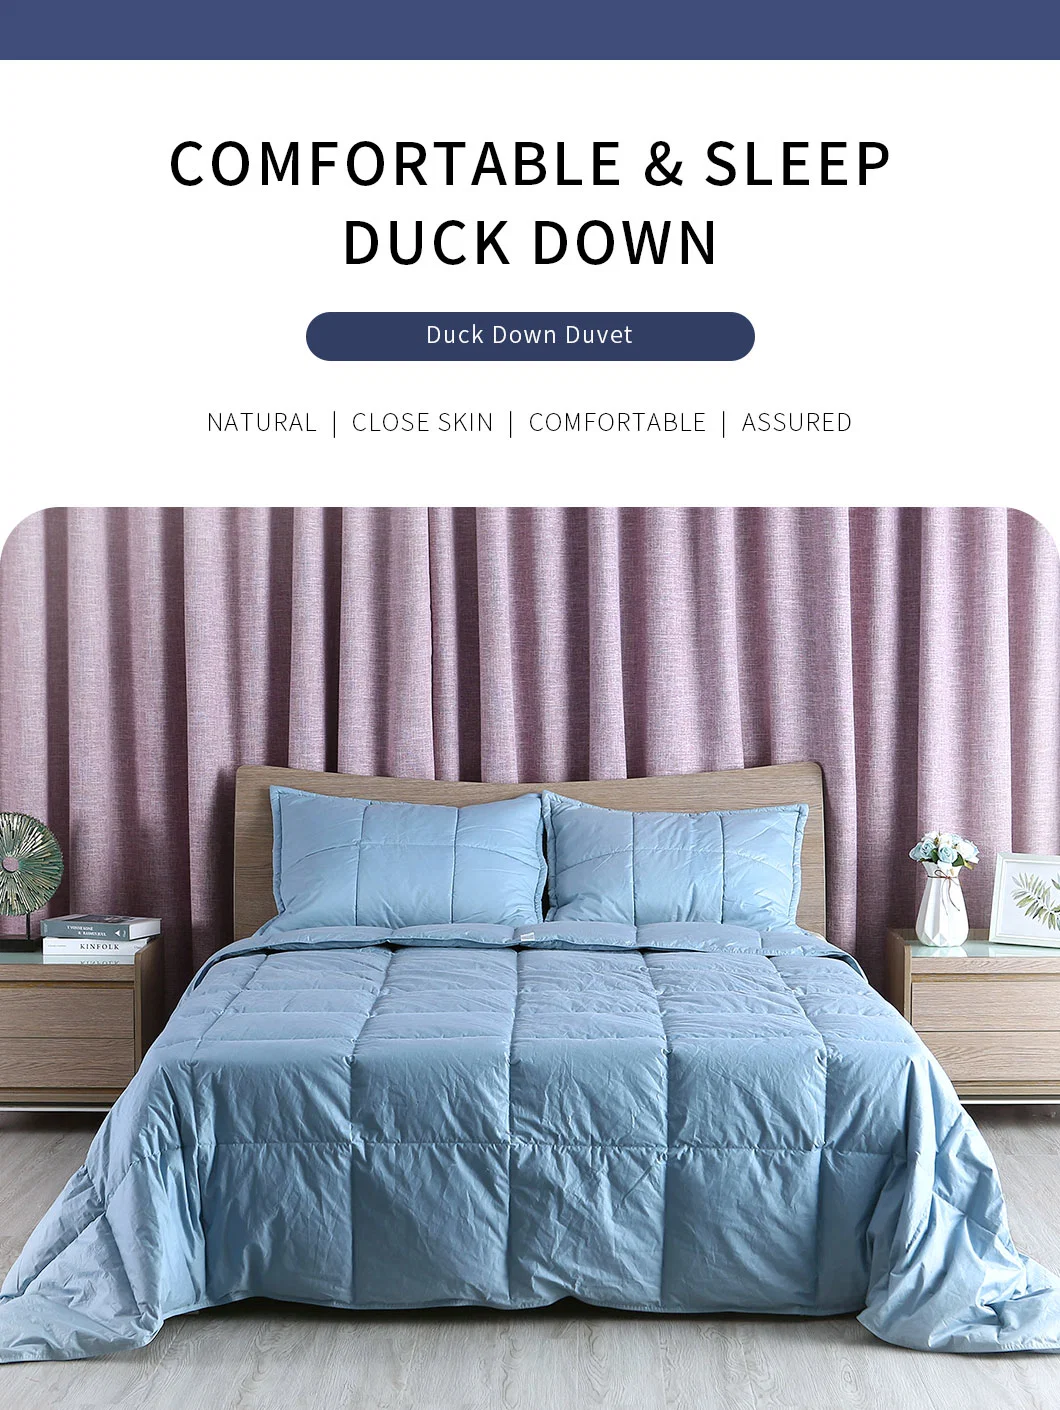 Home Hotel Bedding Blue Cotton Cover 50% White Duck Down Comforter